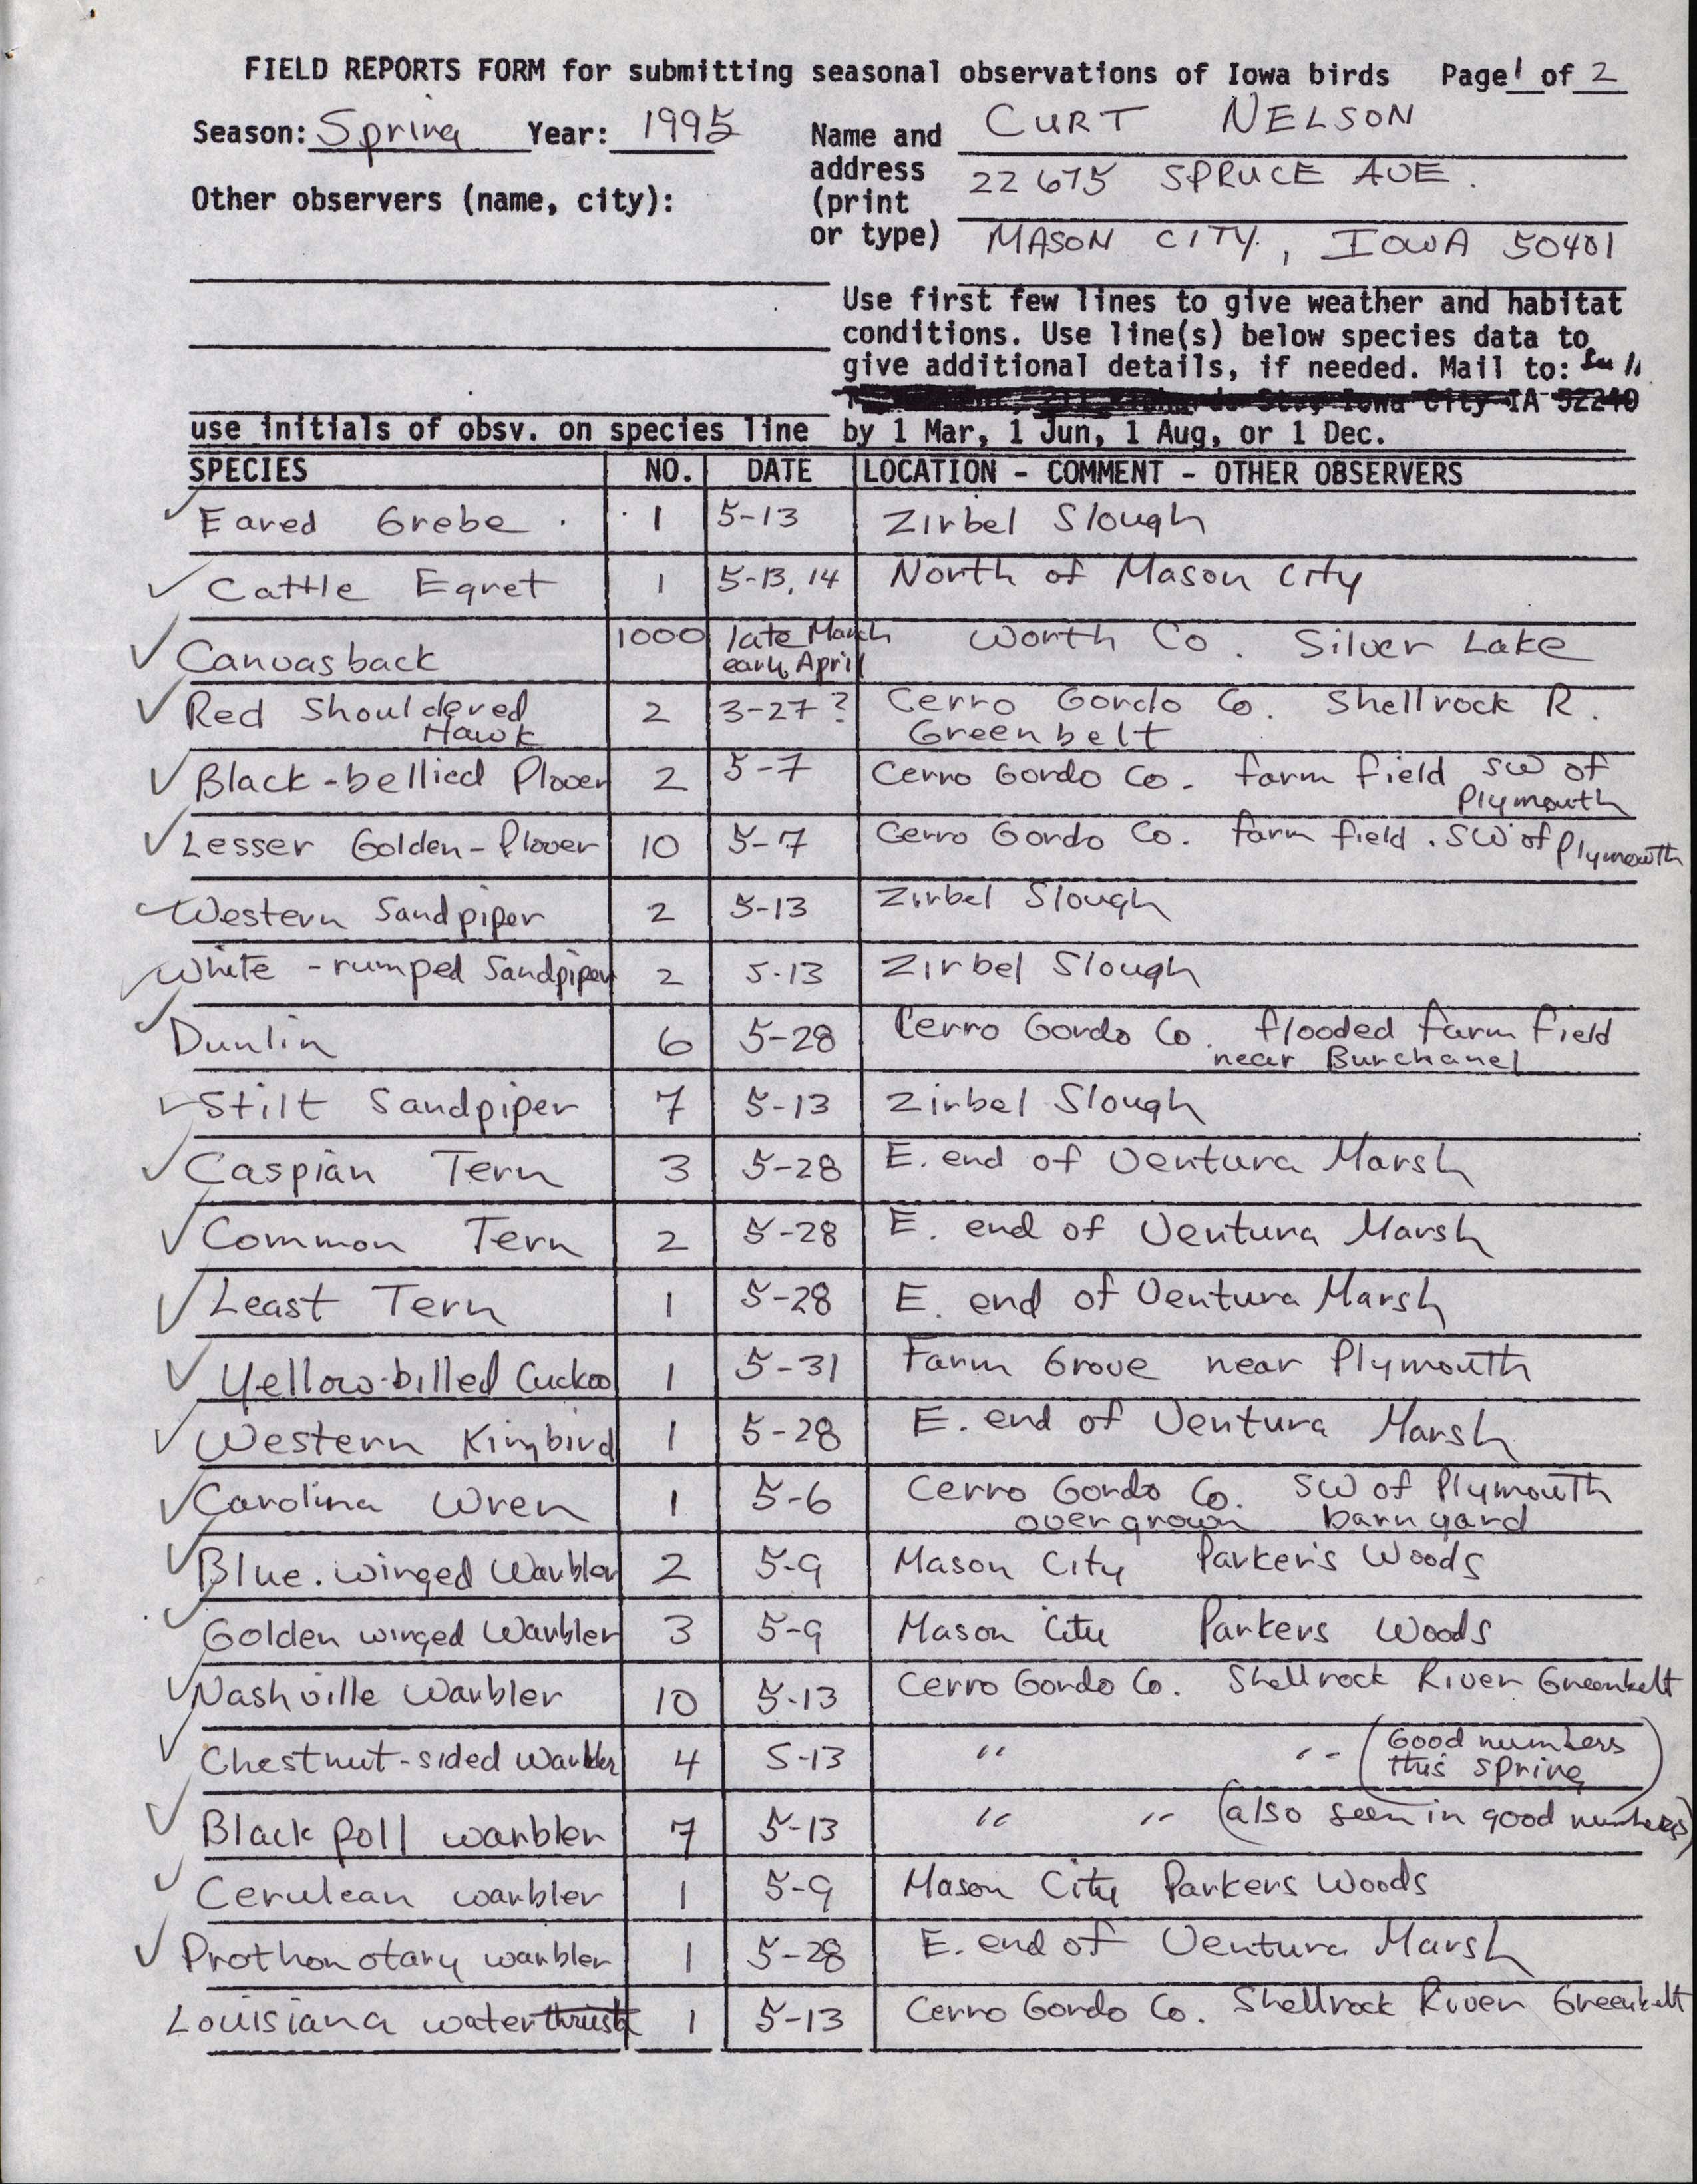 Field reports form for submitting seasonal observations of Iowa birds, spring 1995, Curt Nelson